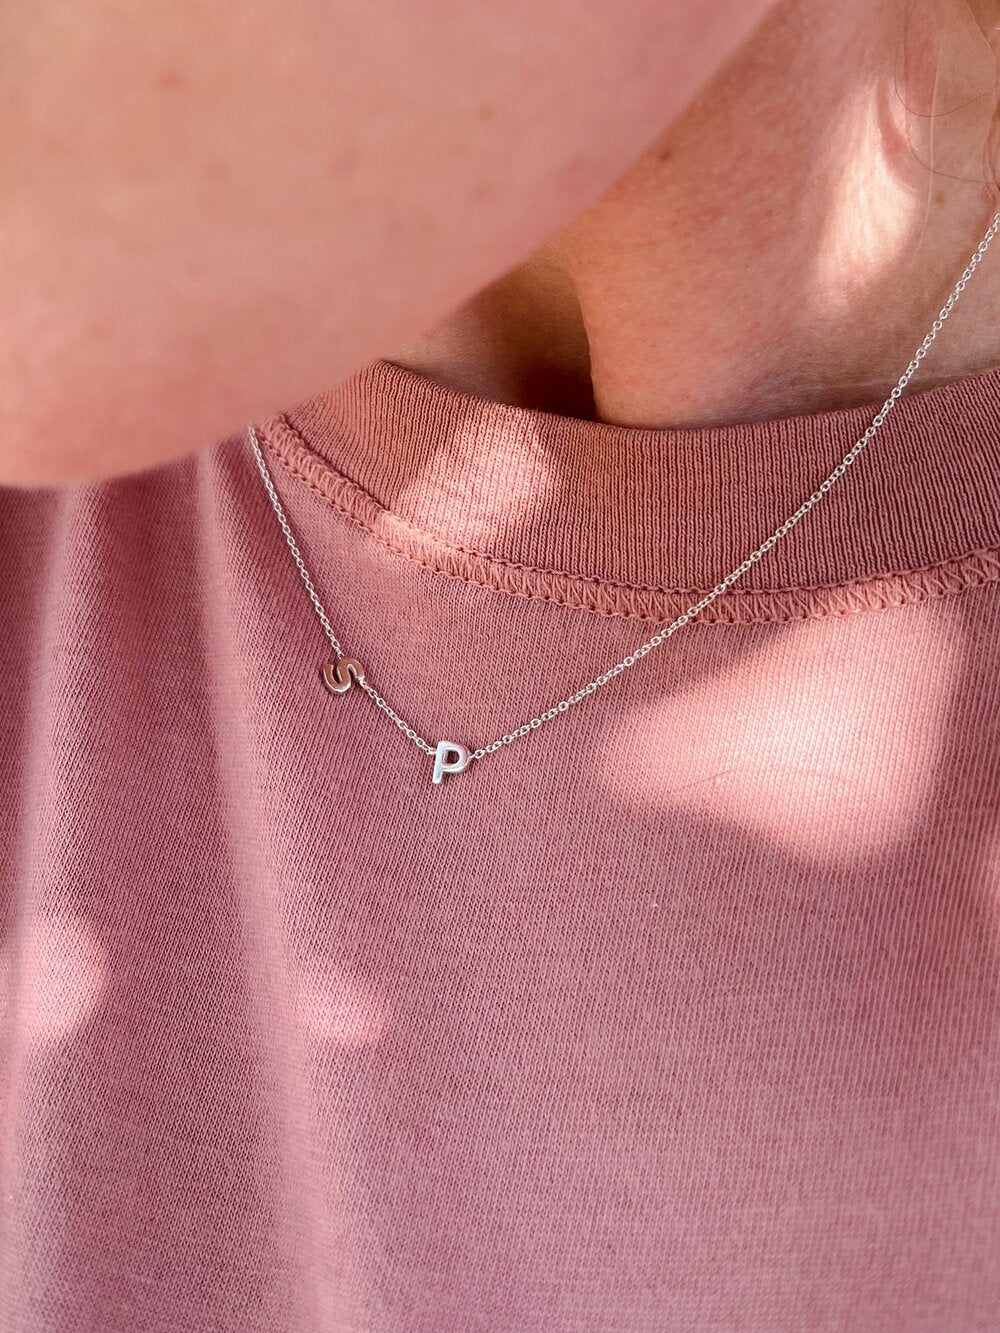 Dainty Initial Necklace by Caitlyn Minimalist Custom Letter Charm Necklace  Delicate Layering Necklace Birthday Gift for Her NM54F77 - Etsy Denmark